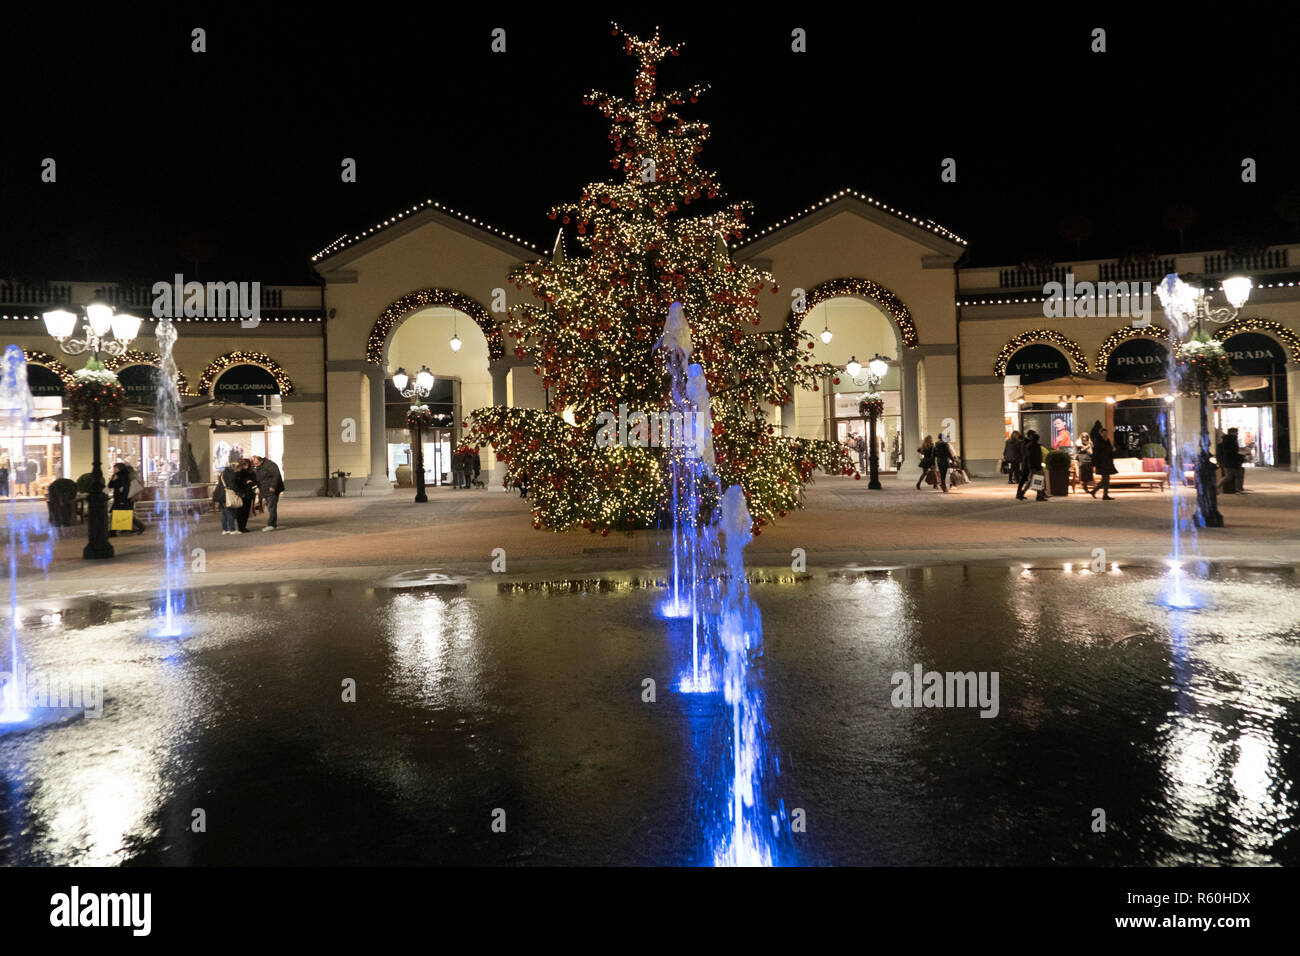 SERRAVALLE SCRIVIA, ITALY - DECEMBER 2 2018 - People buying and shopping  fashion items in mid summer designer outlet christmas season Stock Photo -  Alamy